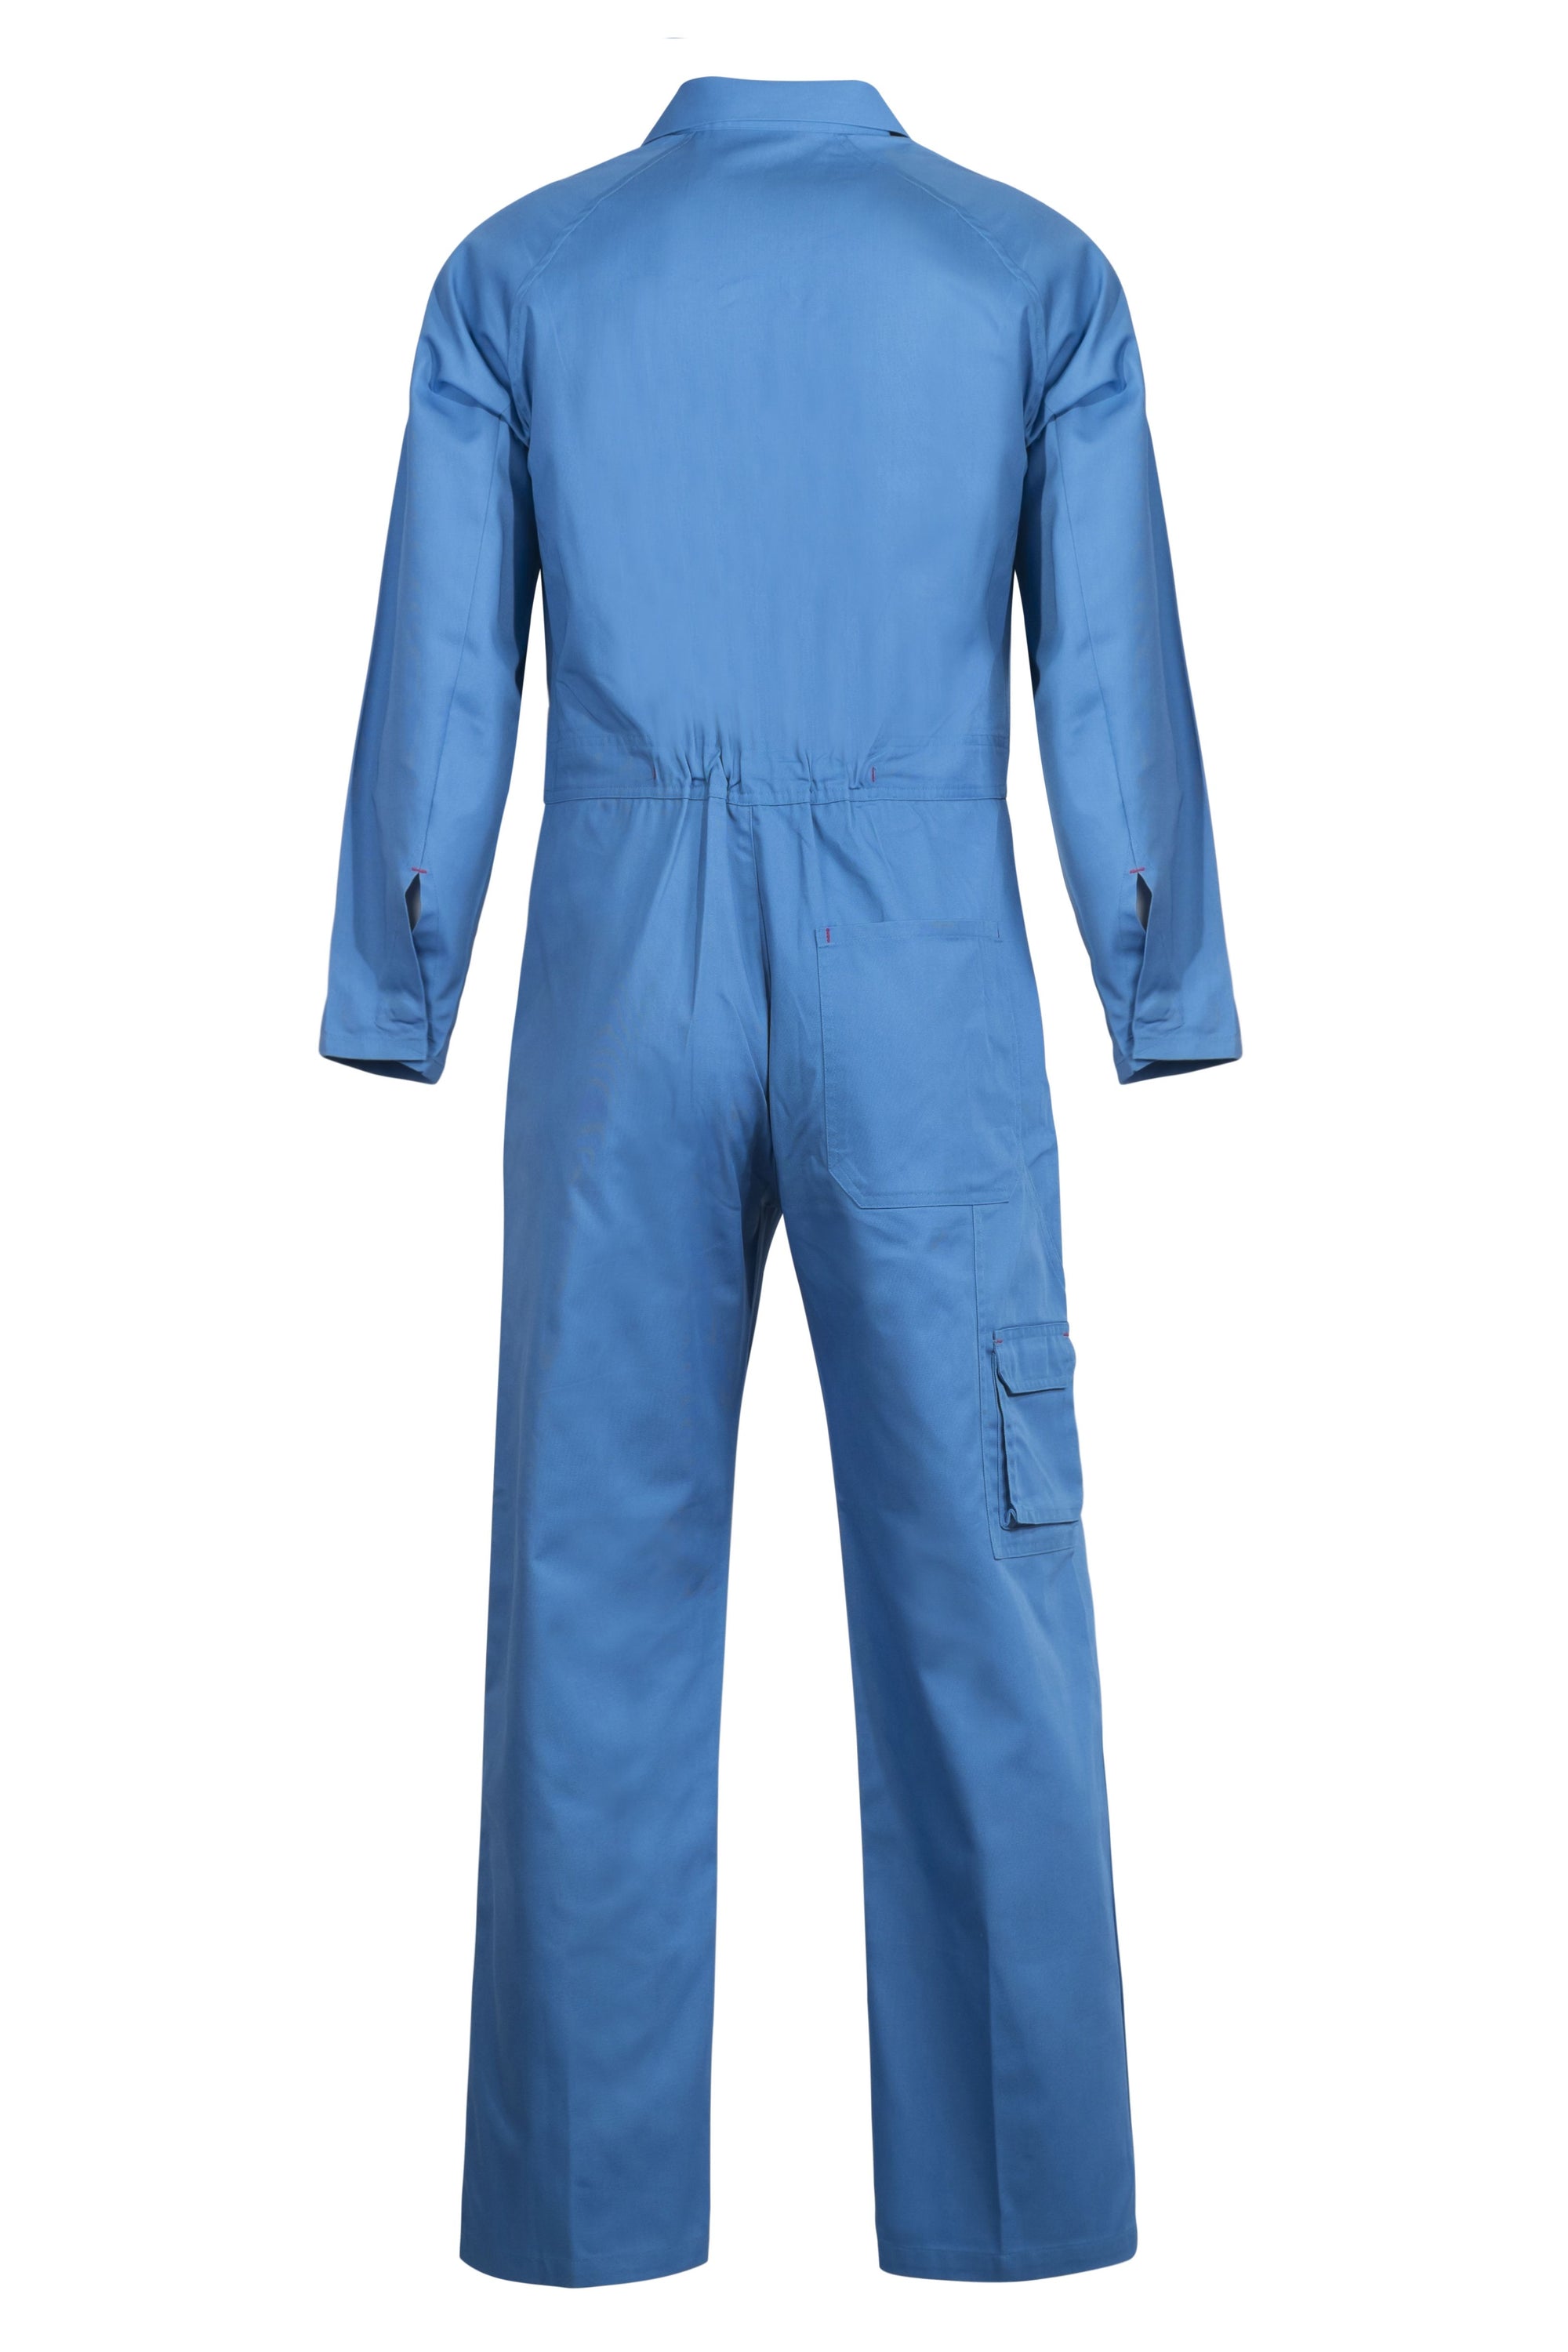 WorkCraft Mens Navy Poly/Cotton Coveralls 220g 87R